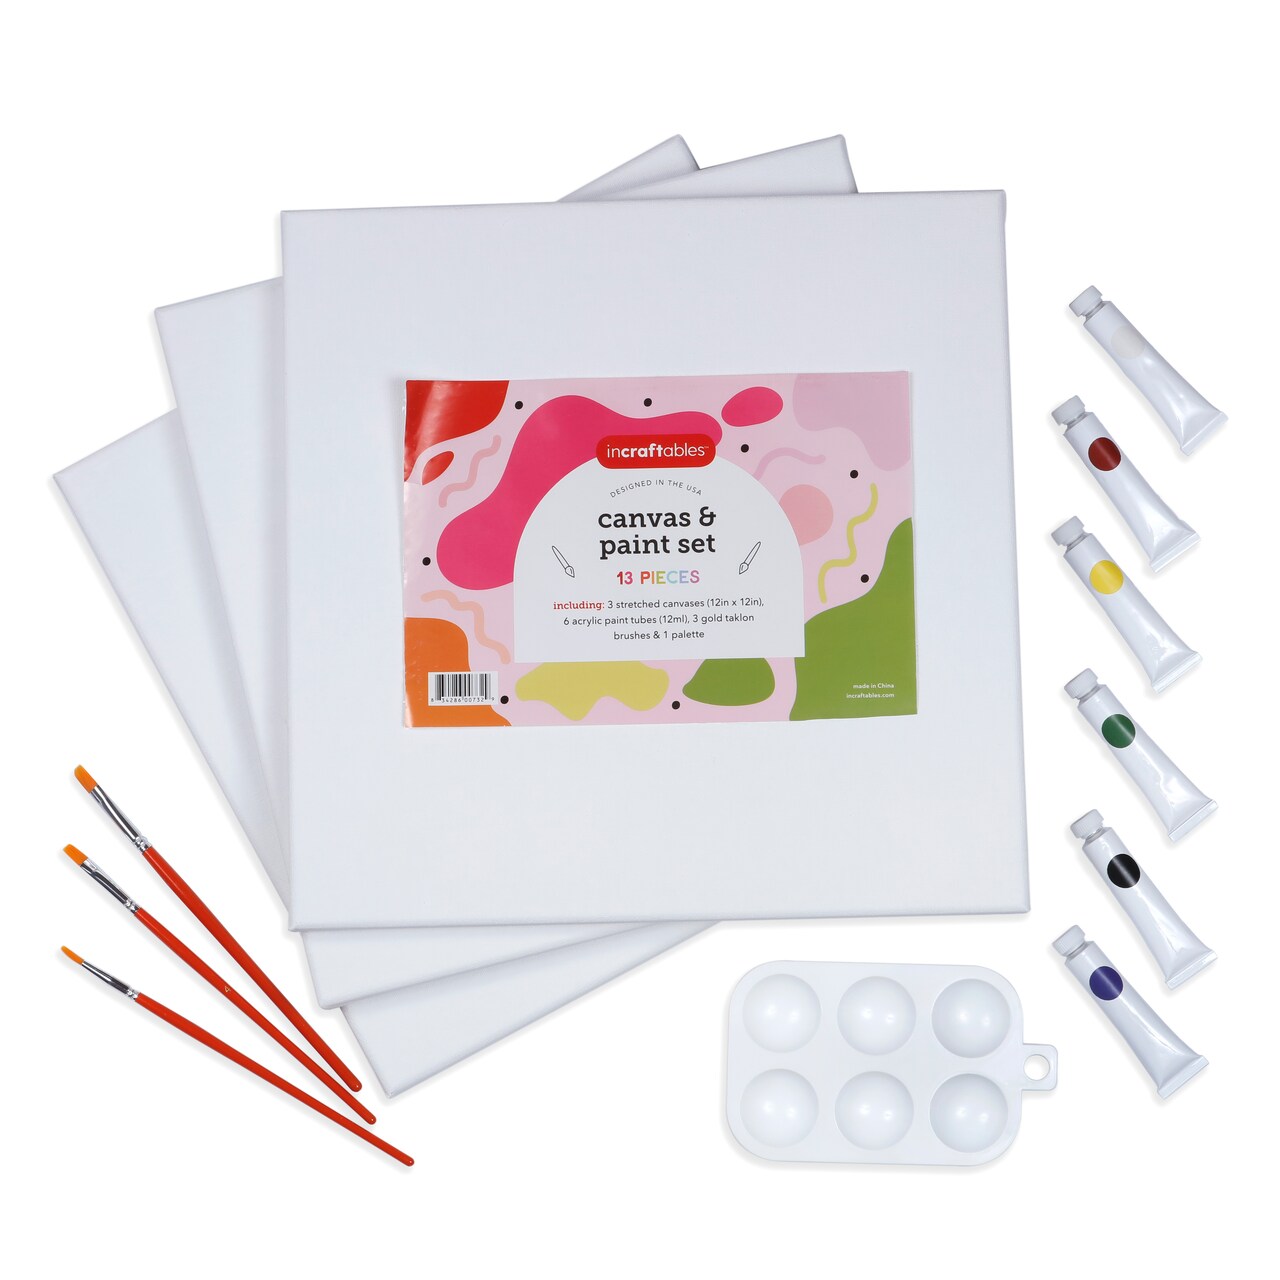 Incraftables Canvas and Paint set for Adults. Acrylic Painting Kit